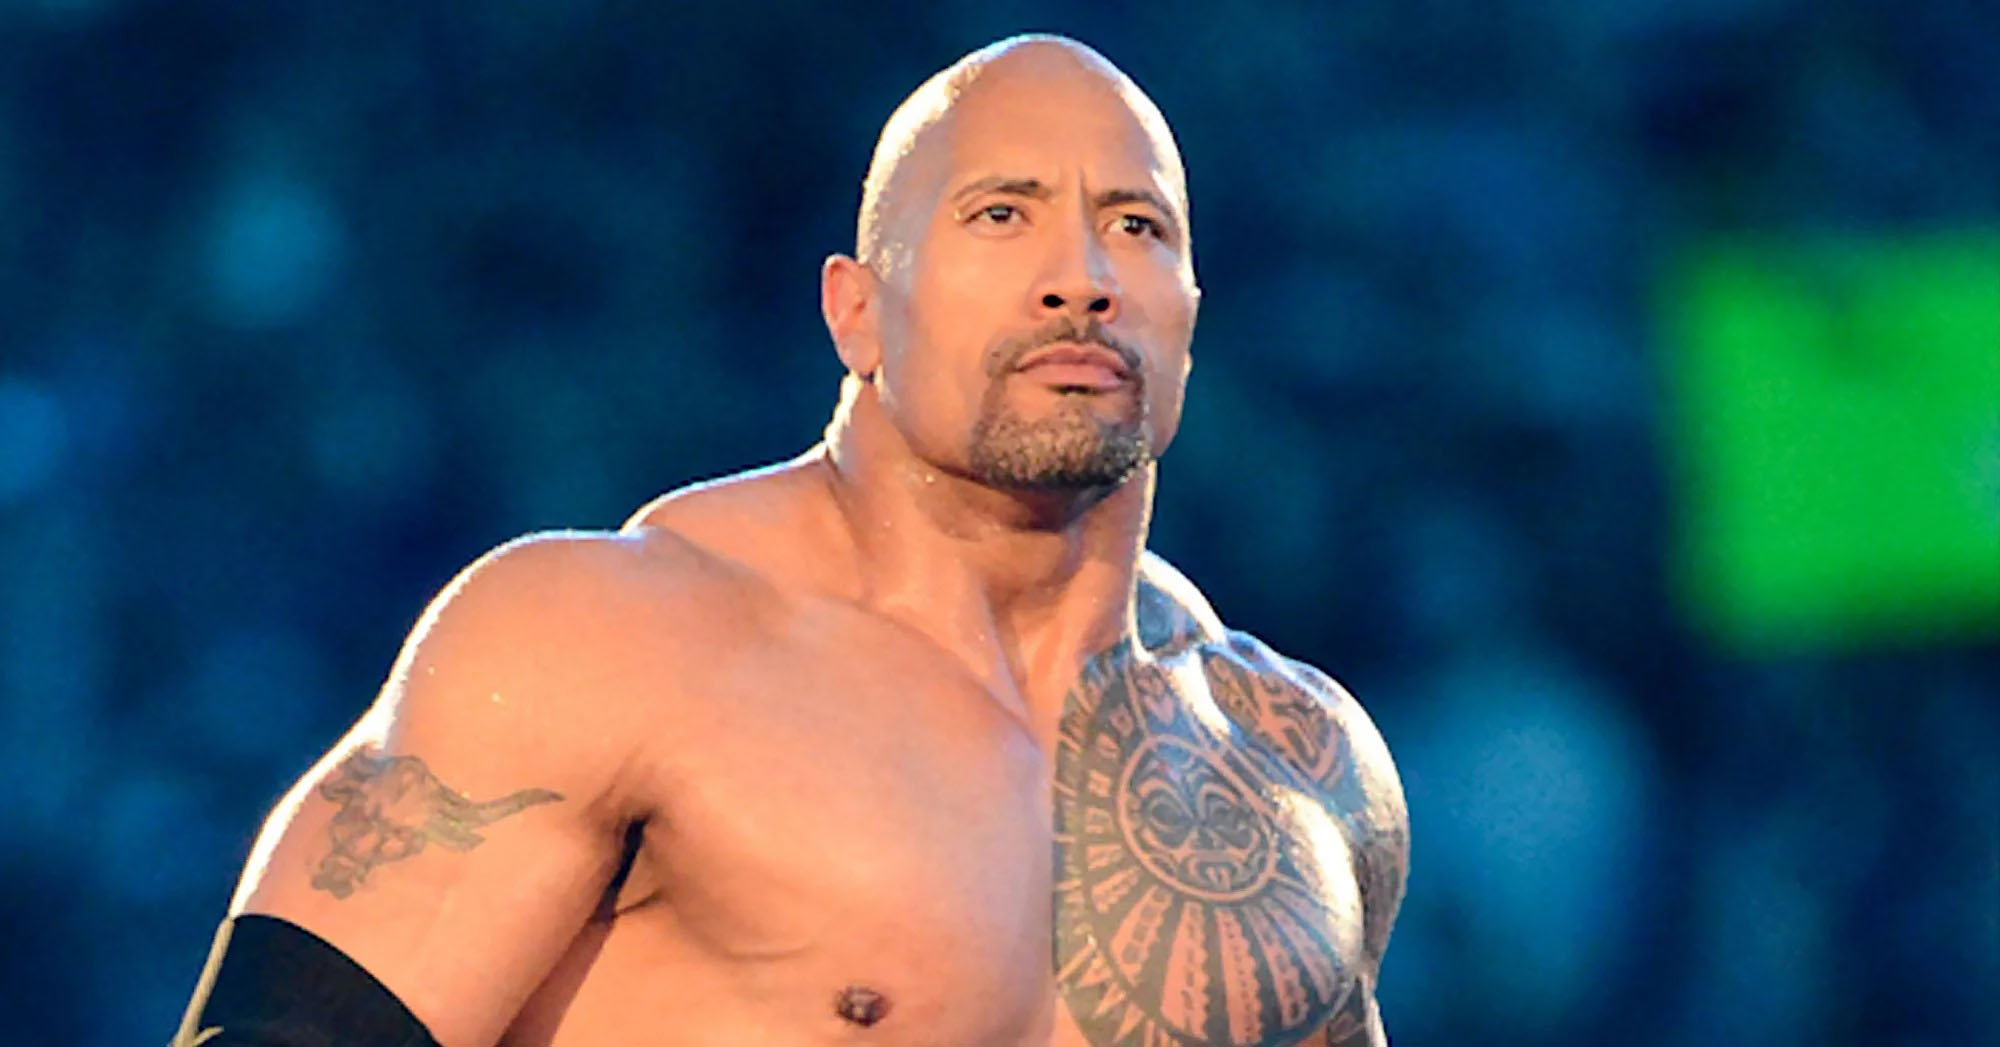 clare mcneal add photo naked dwayne johnson